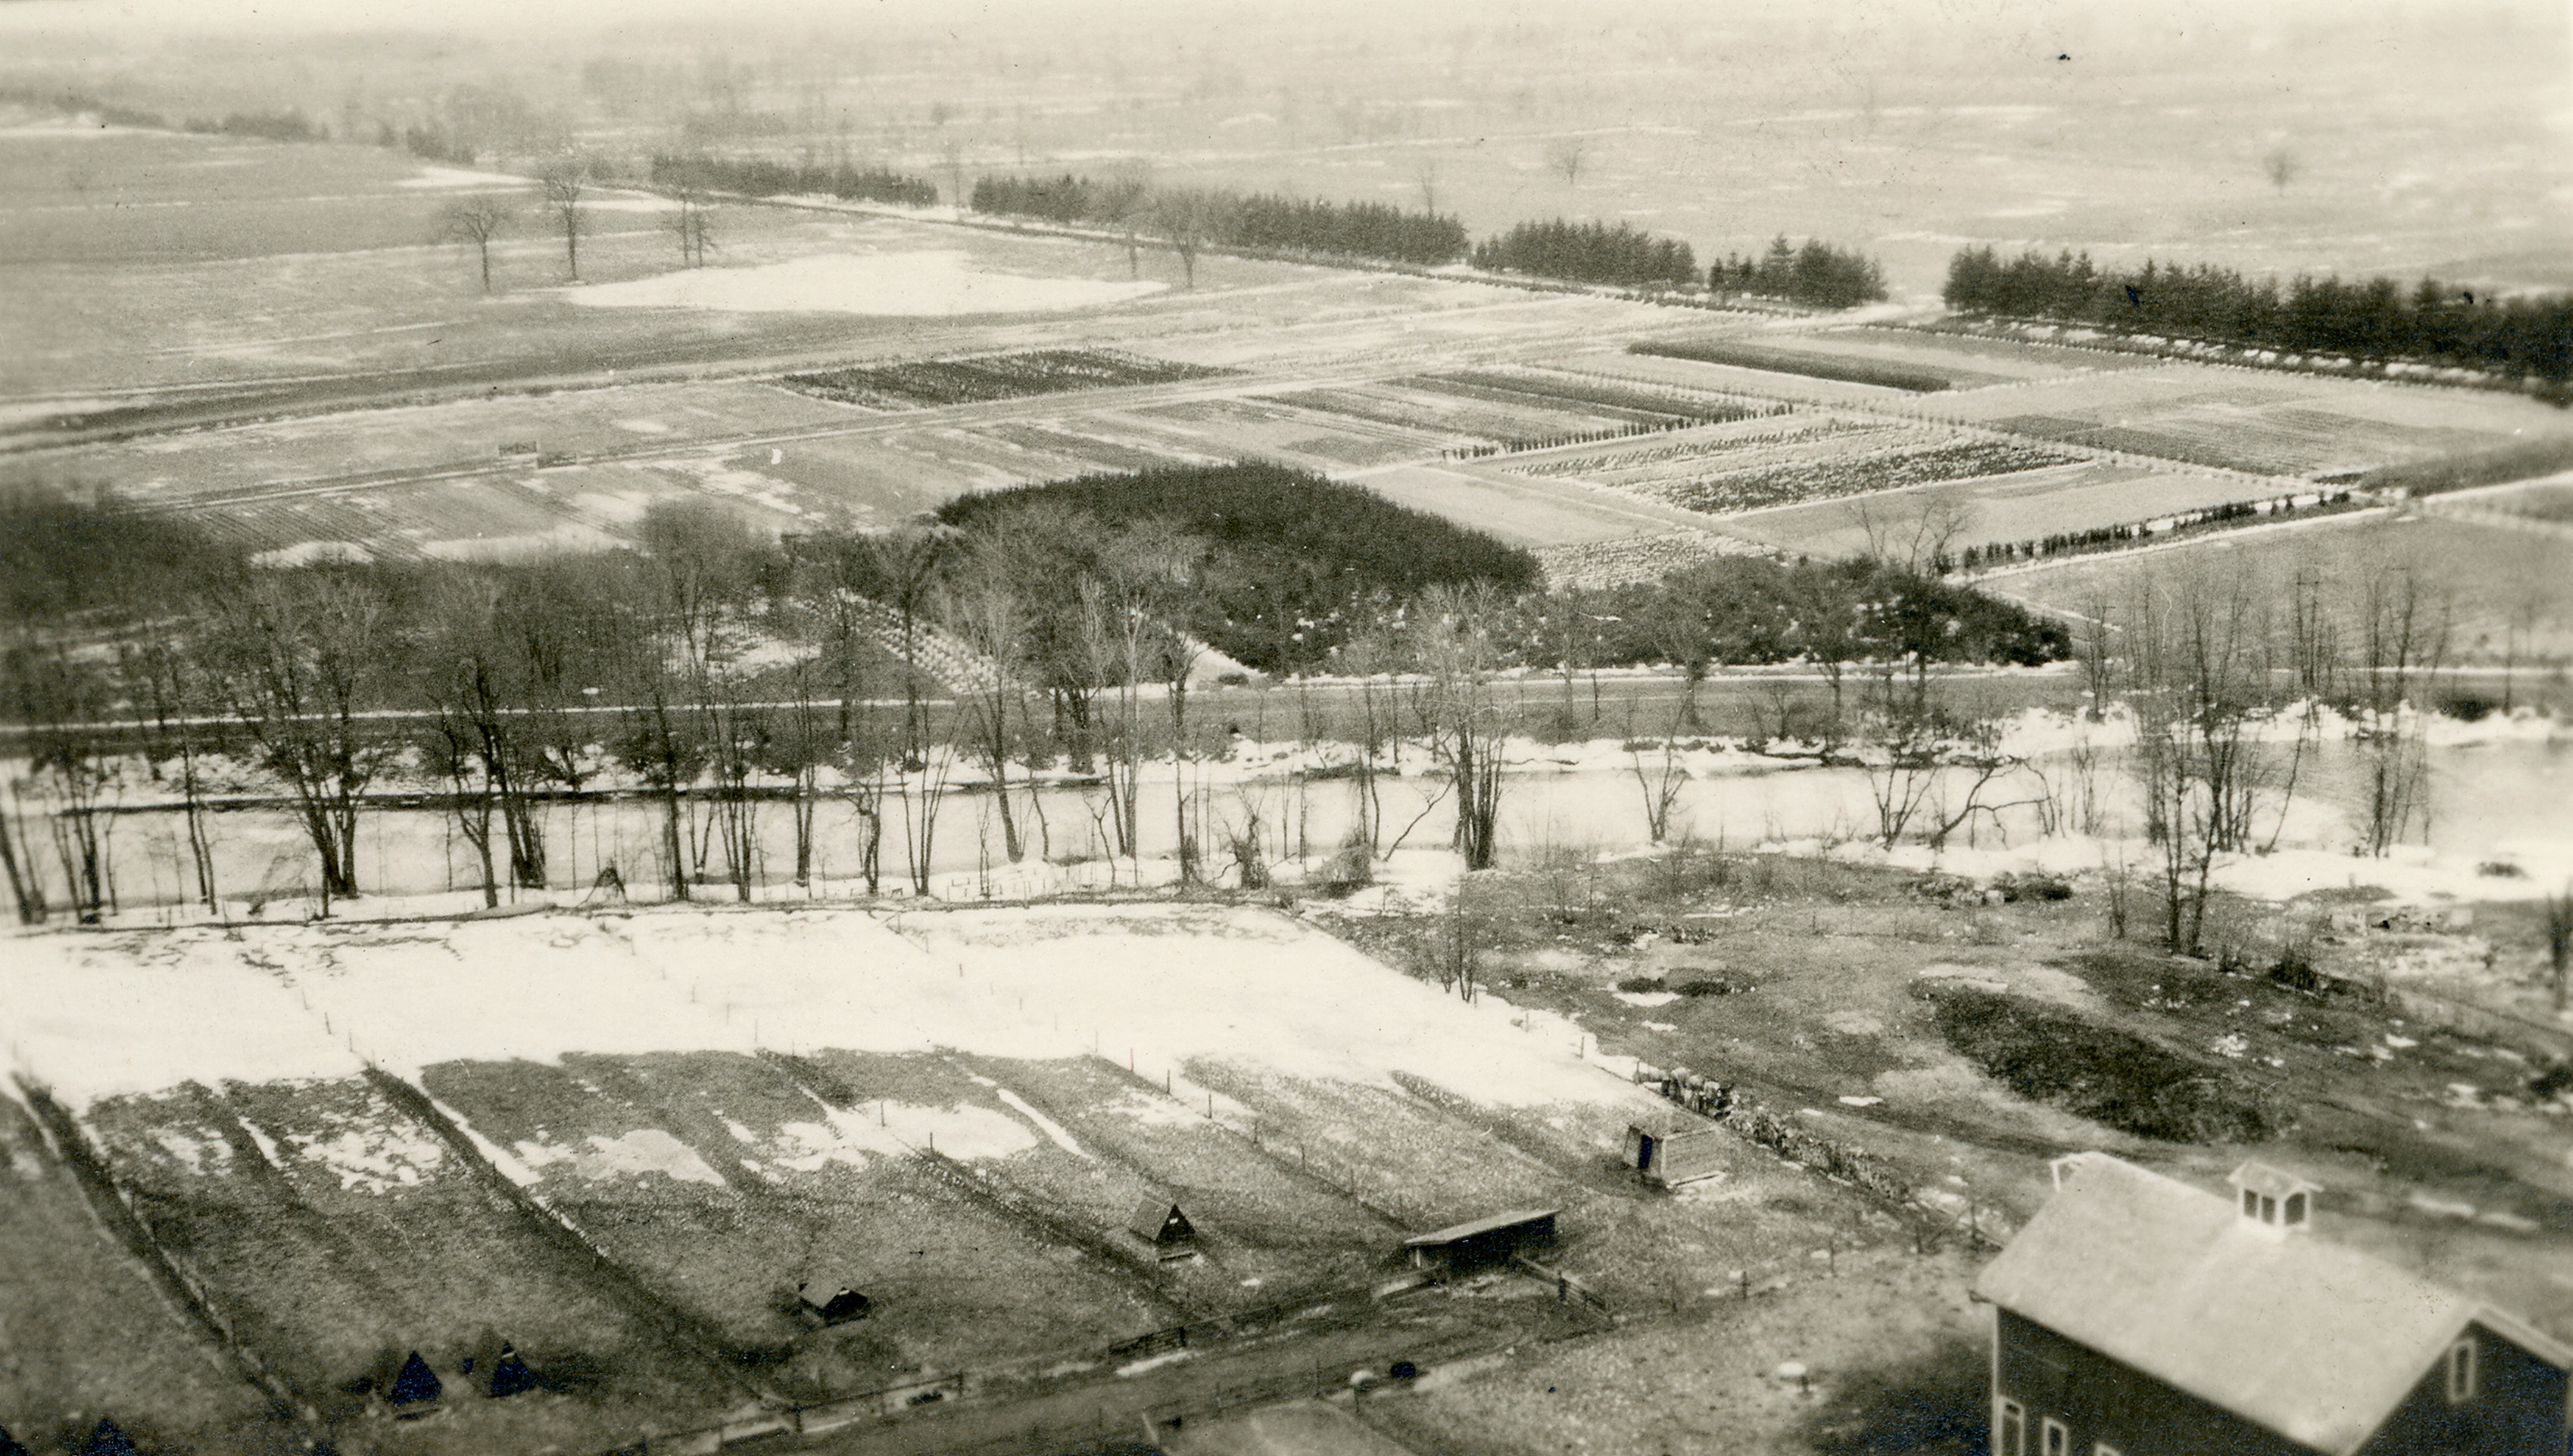 Aerial view of forestry plats, undated